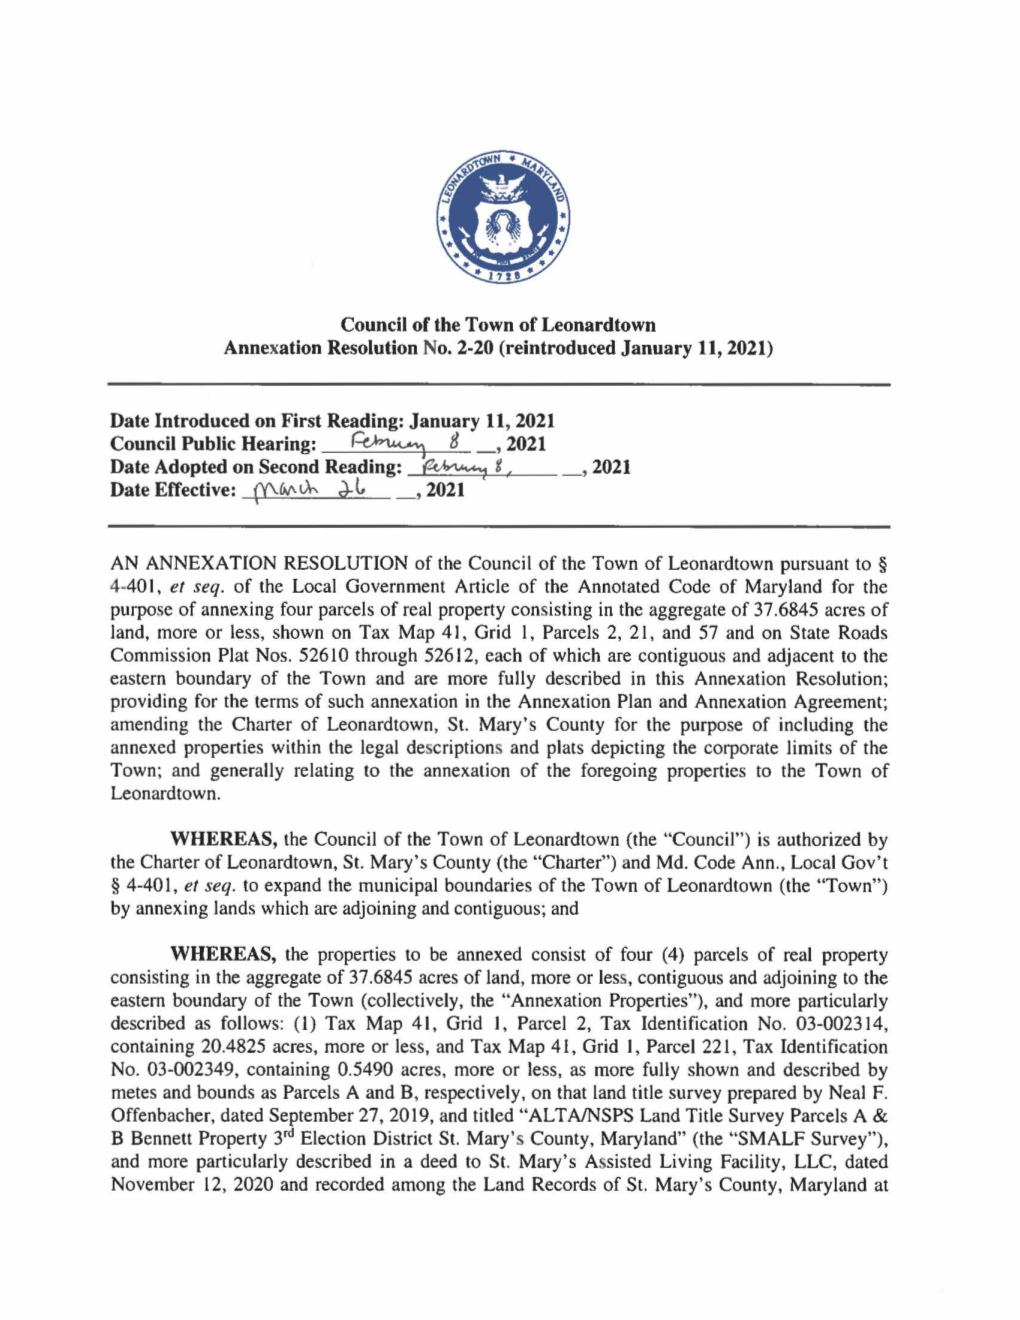 Council of the Town of Leonardtown Annexation Resolution No